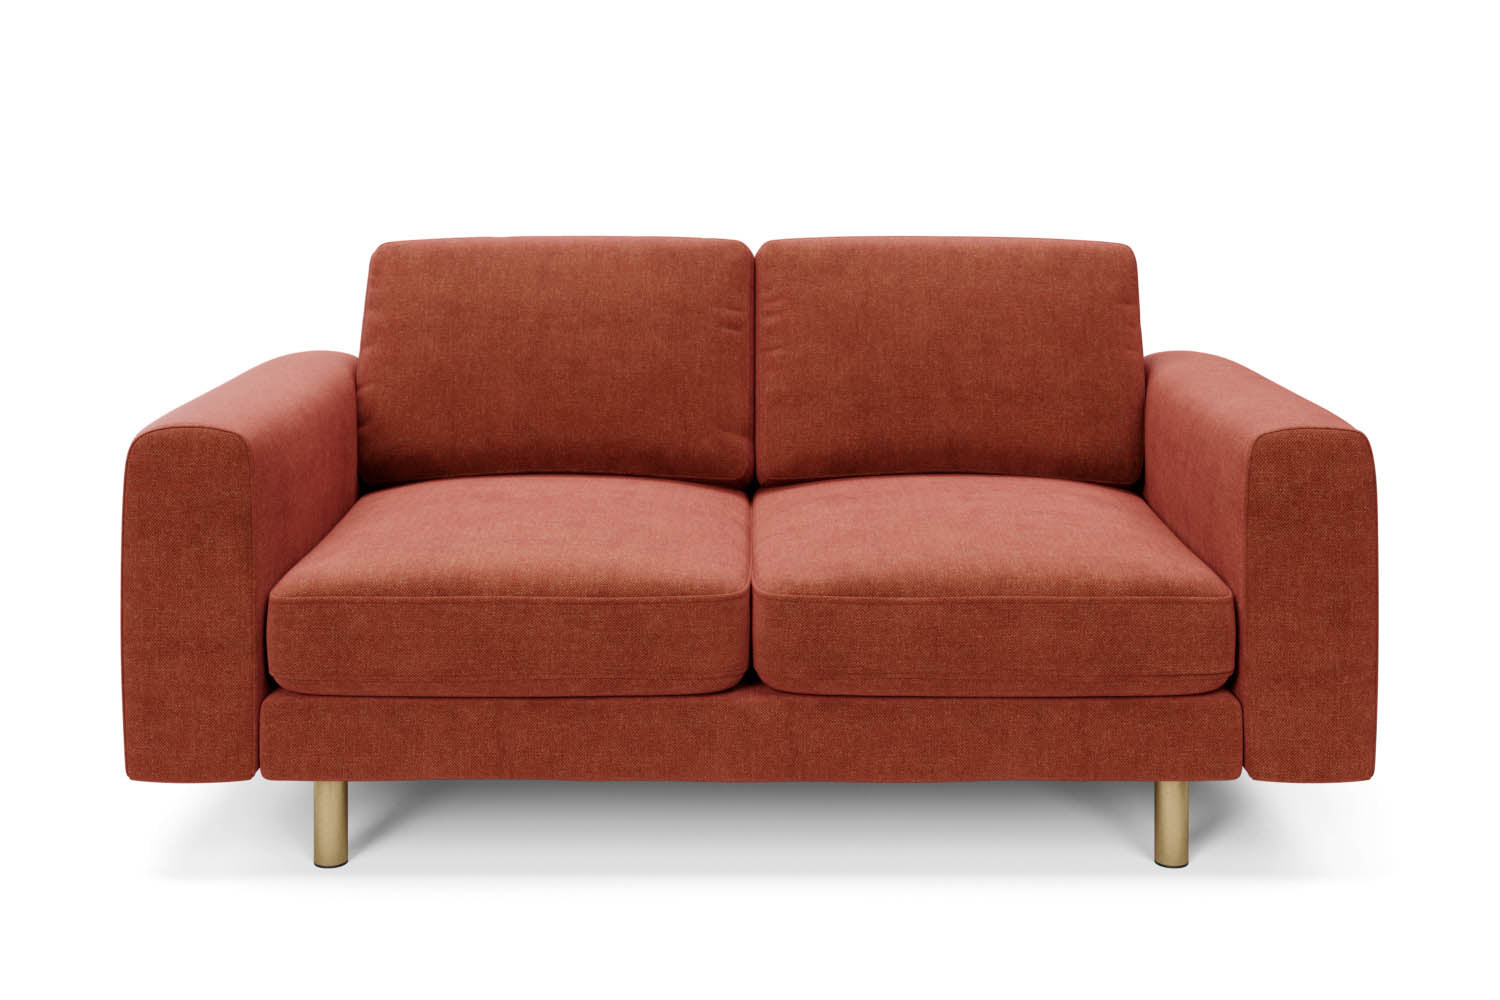 The Big Chill 2 Seater Sofa in Spice Chenille with metal legs front variant_40886266724400